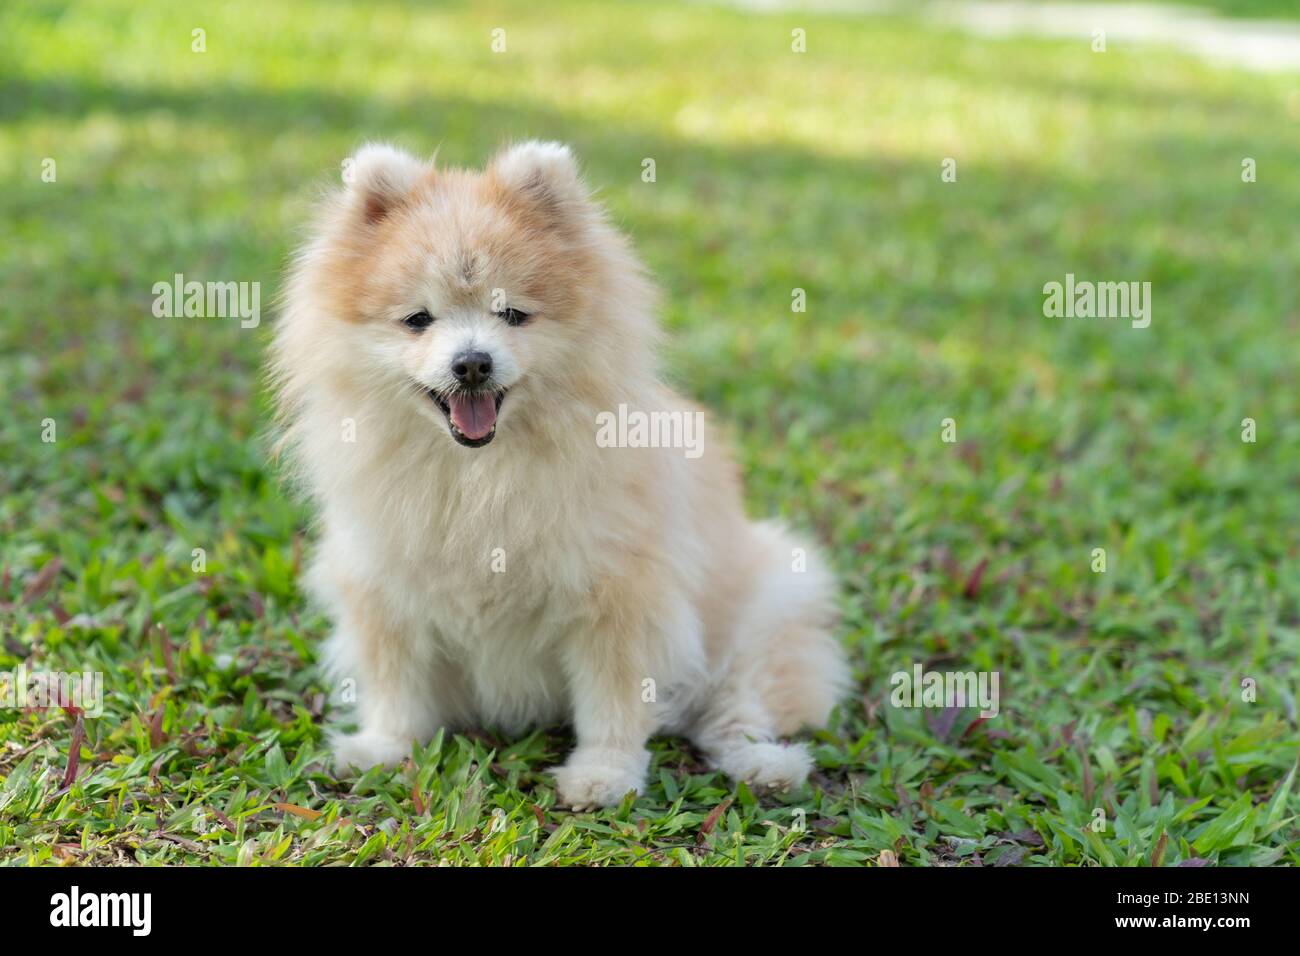 Pomeranian dog siting on green grass in the garden. Stock Photo